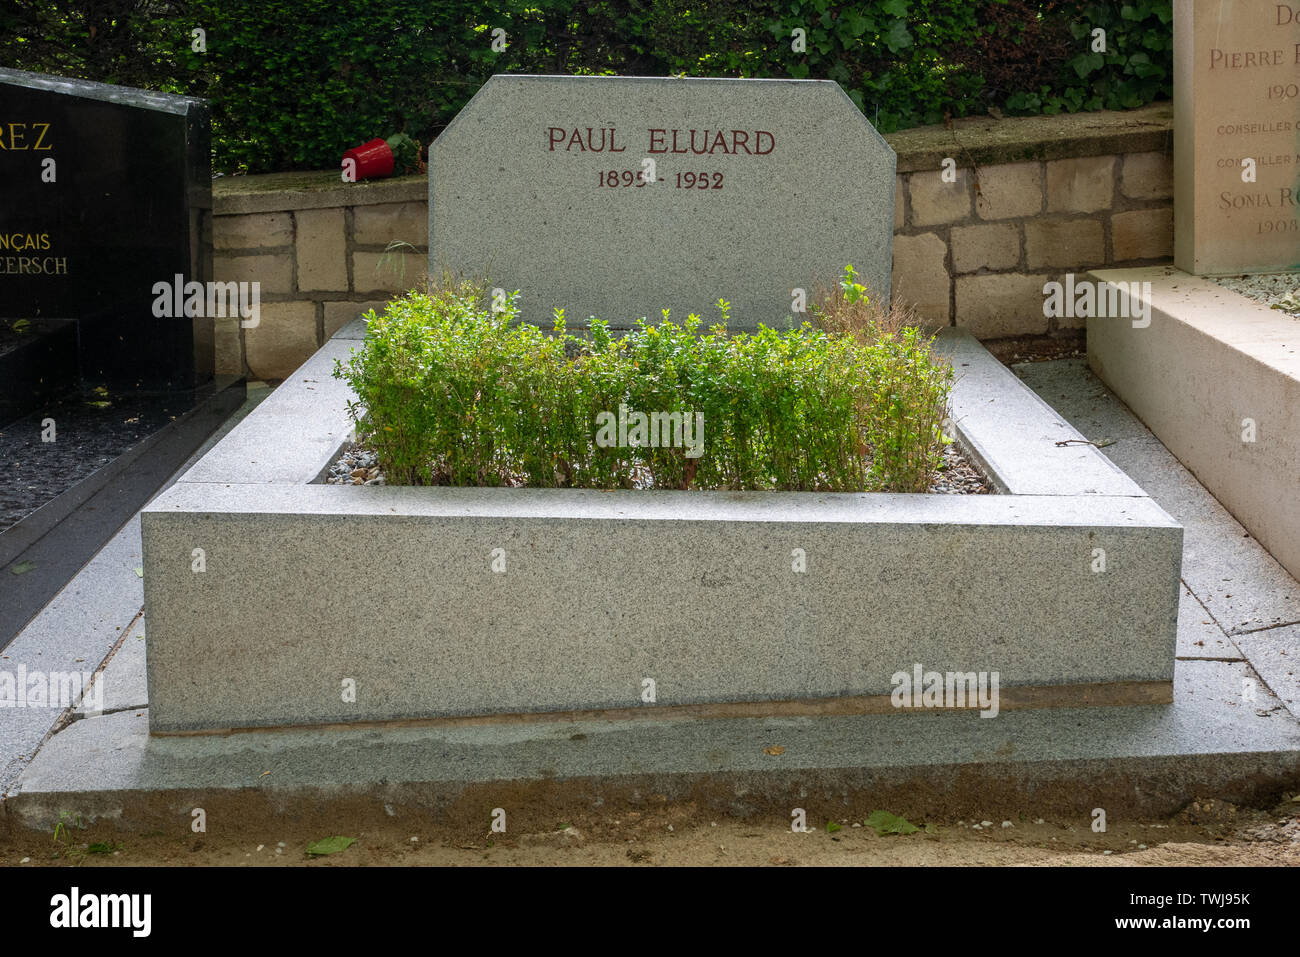 Paris, France - May 28, 2019: The french poet Paul Eluard tomb at the Père Lachaise cemetery. Stock Photo